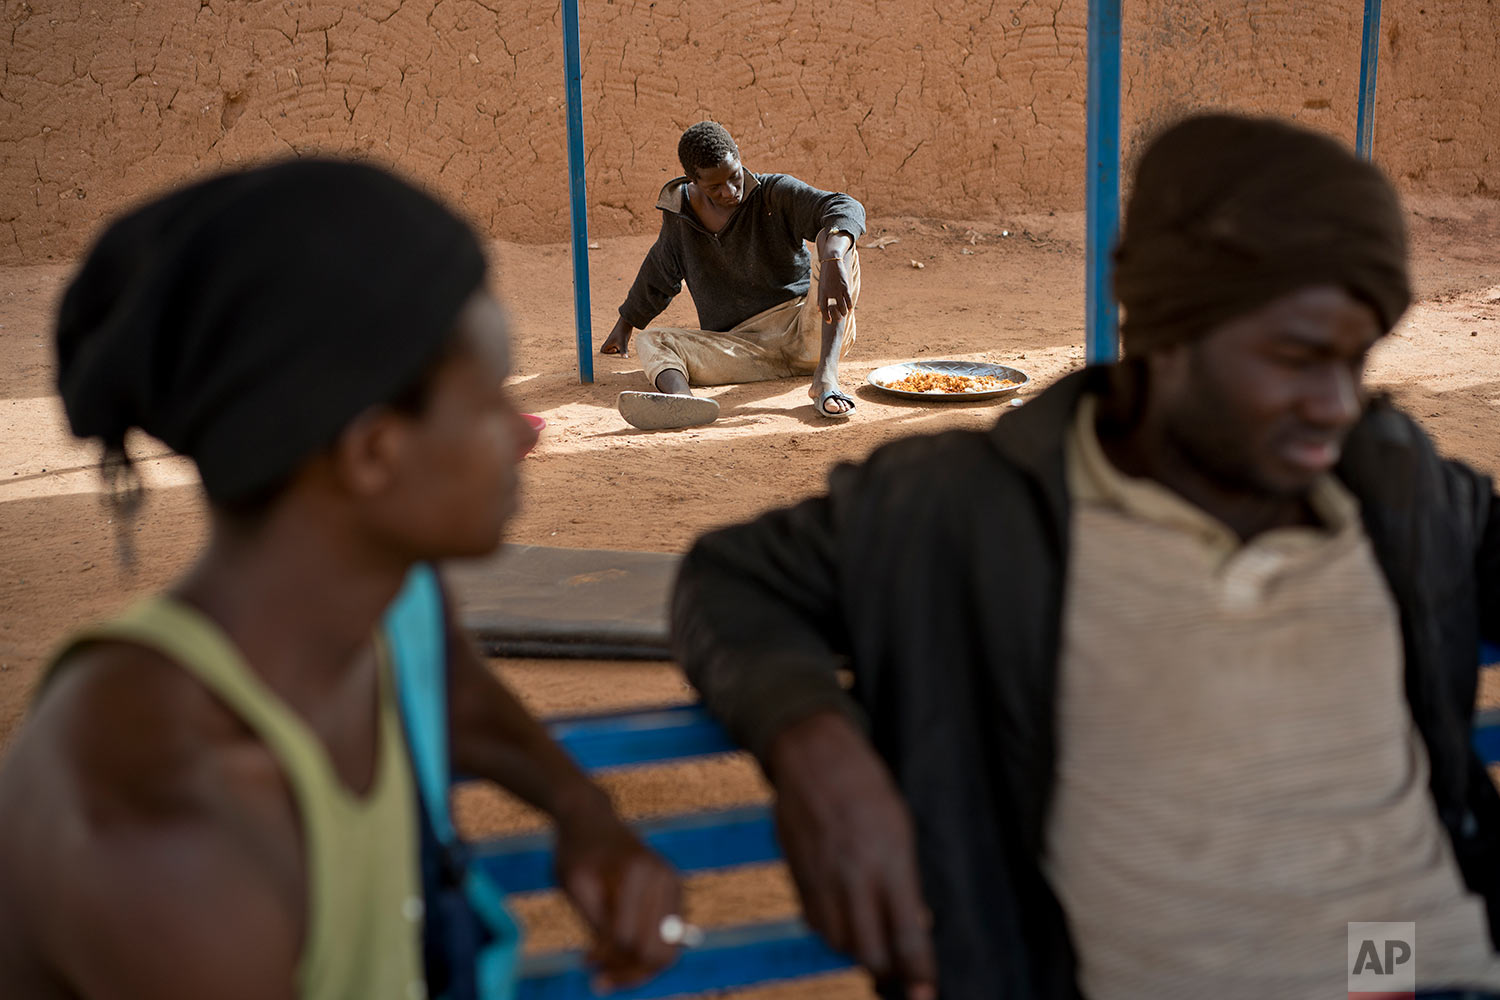  A young migrant who has been expelled from Algeria sits in a transit center in Arlit, Niger, on June 1,2018. (AP Photo/Jerome Delay) 